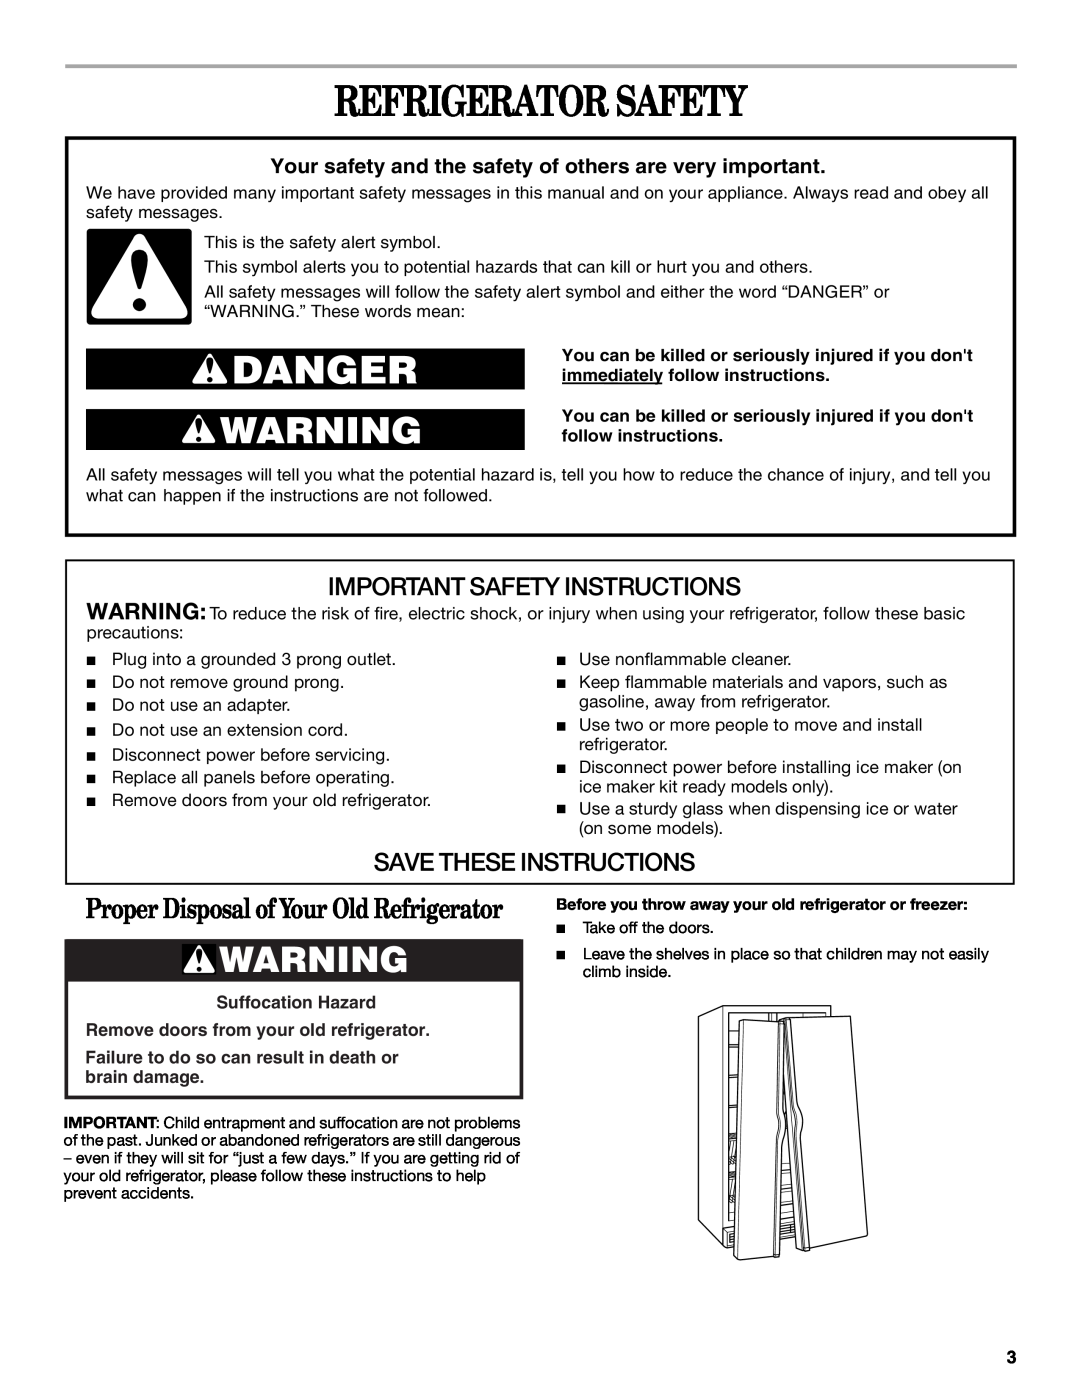 Whirlpool KTRA22EMWH02 manual Refrigerator Safety, Proper Disposal of Your Old Refrigerator, Important Safety Instructions 